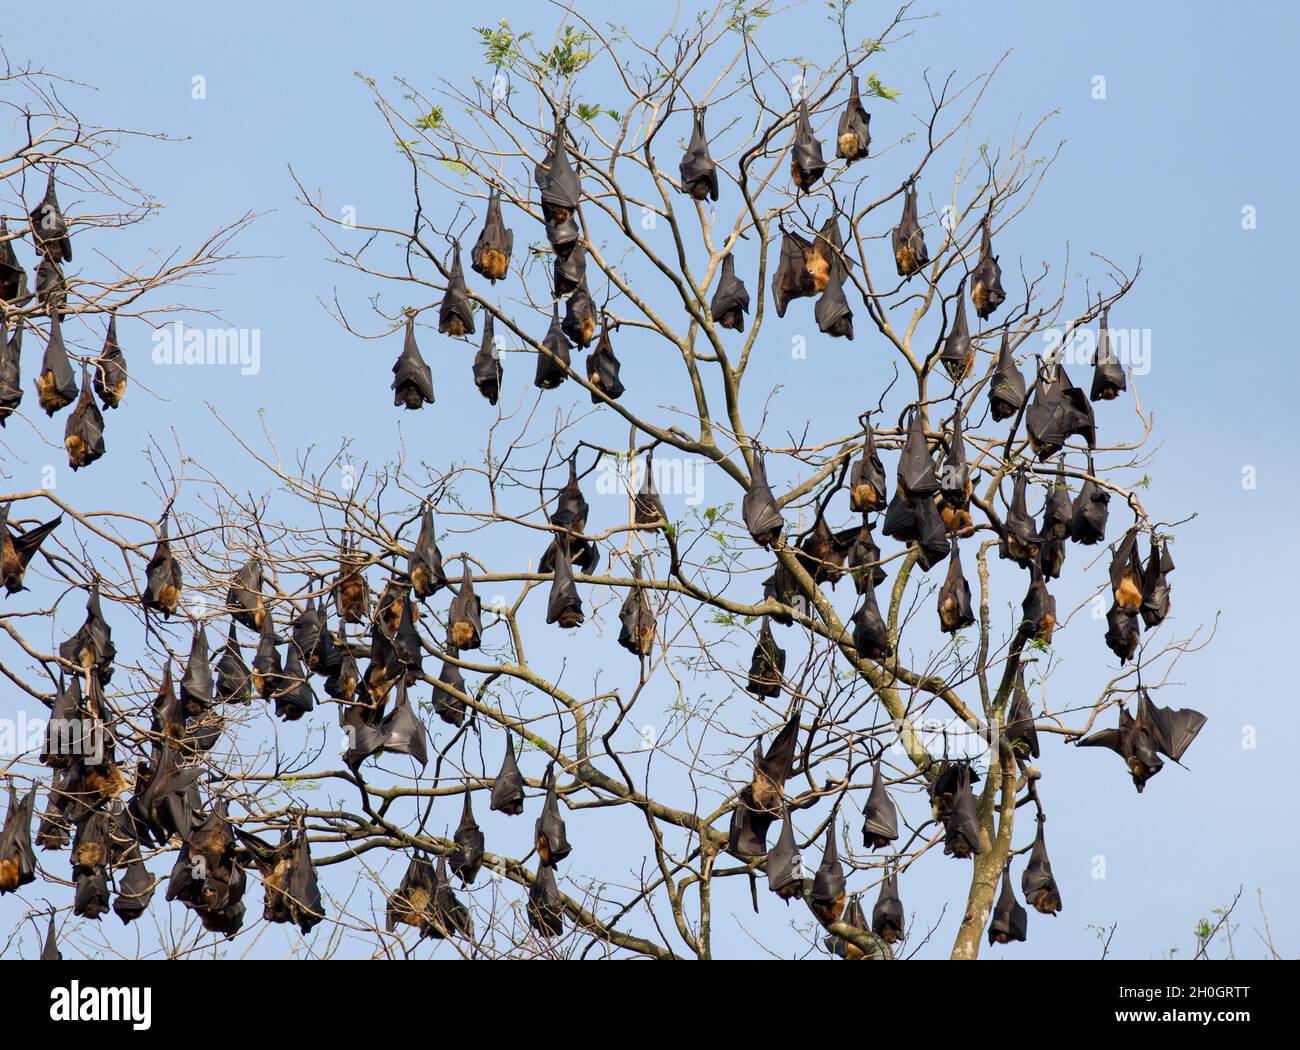 Group of bats (flying foxes) resting on branches in Sri Lanka Stock Photo